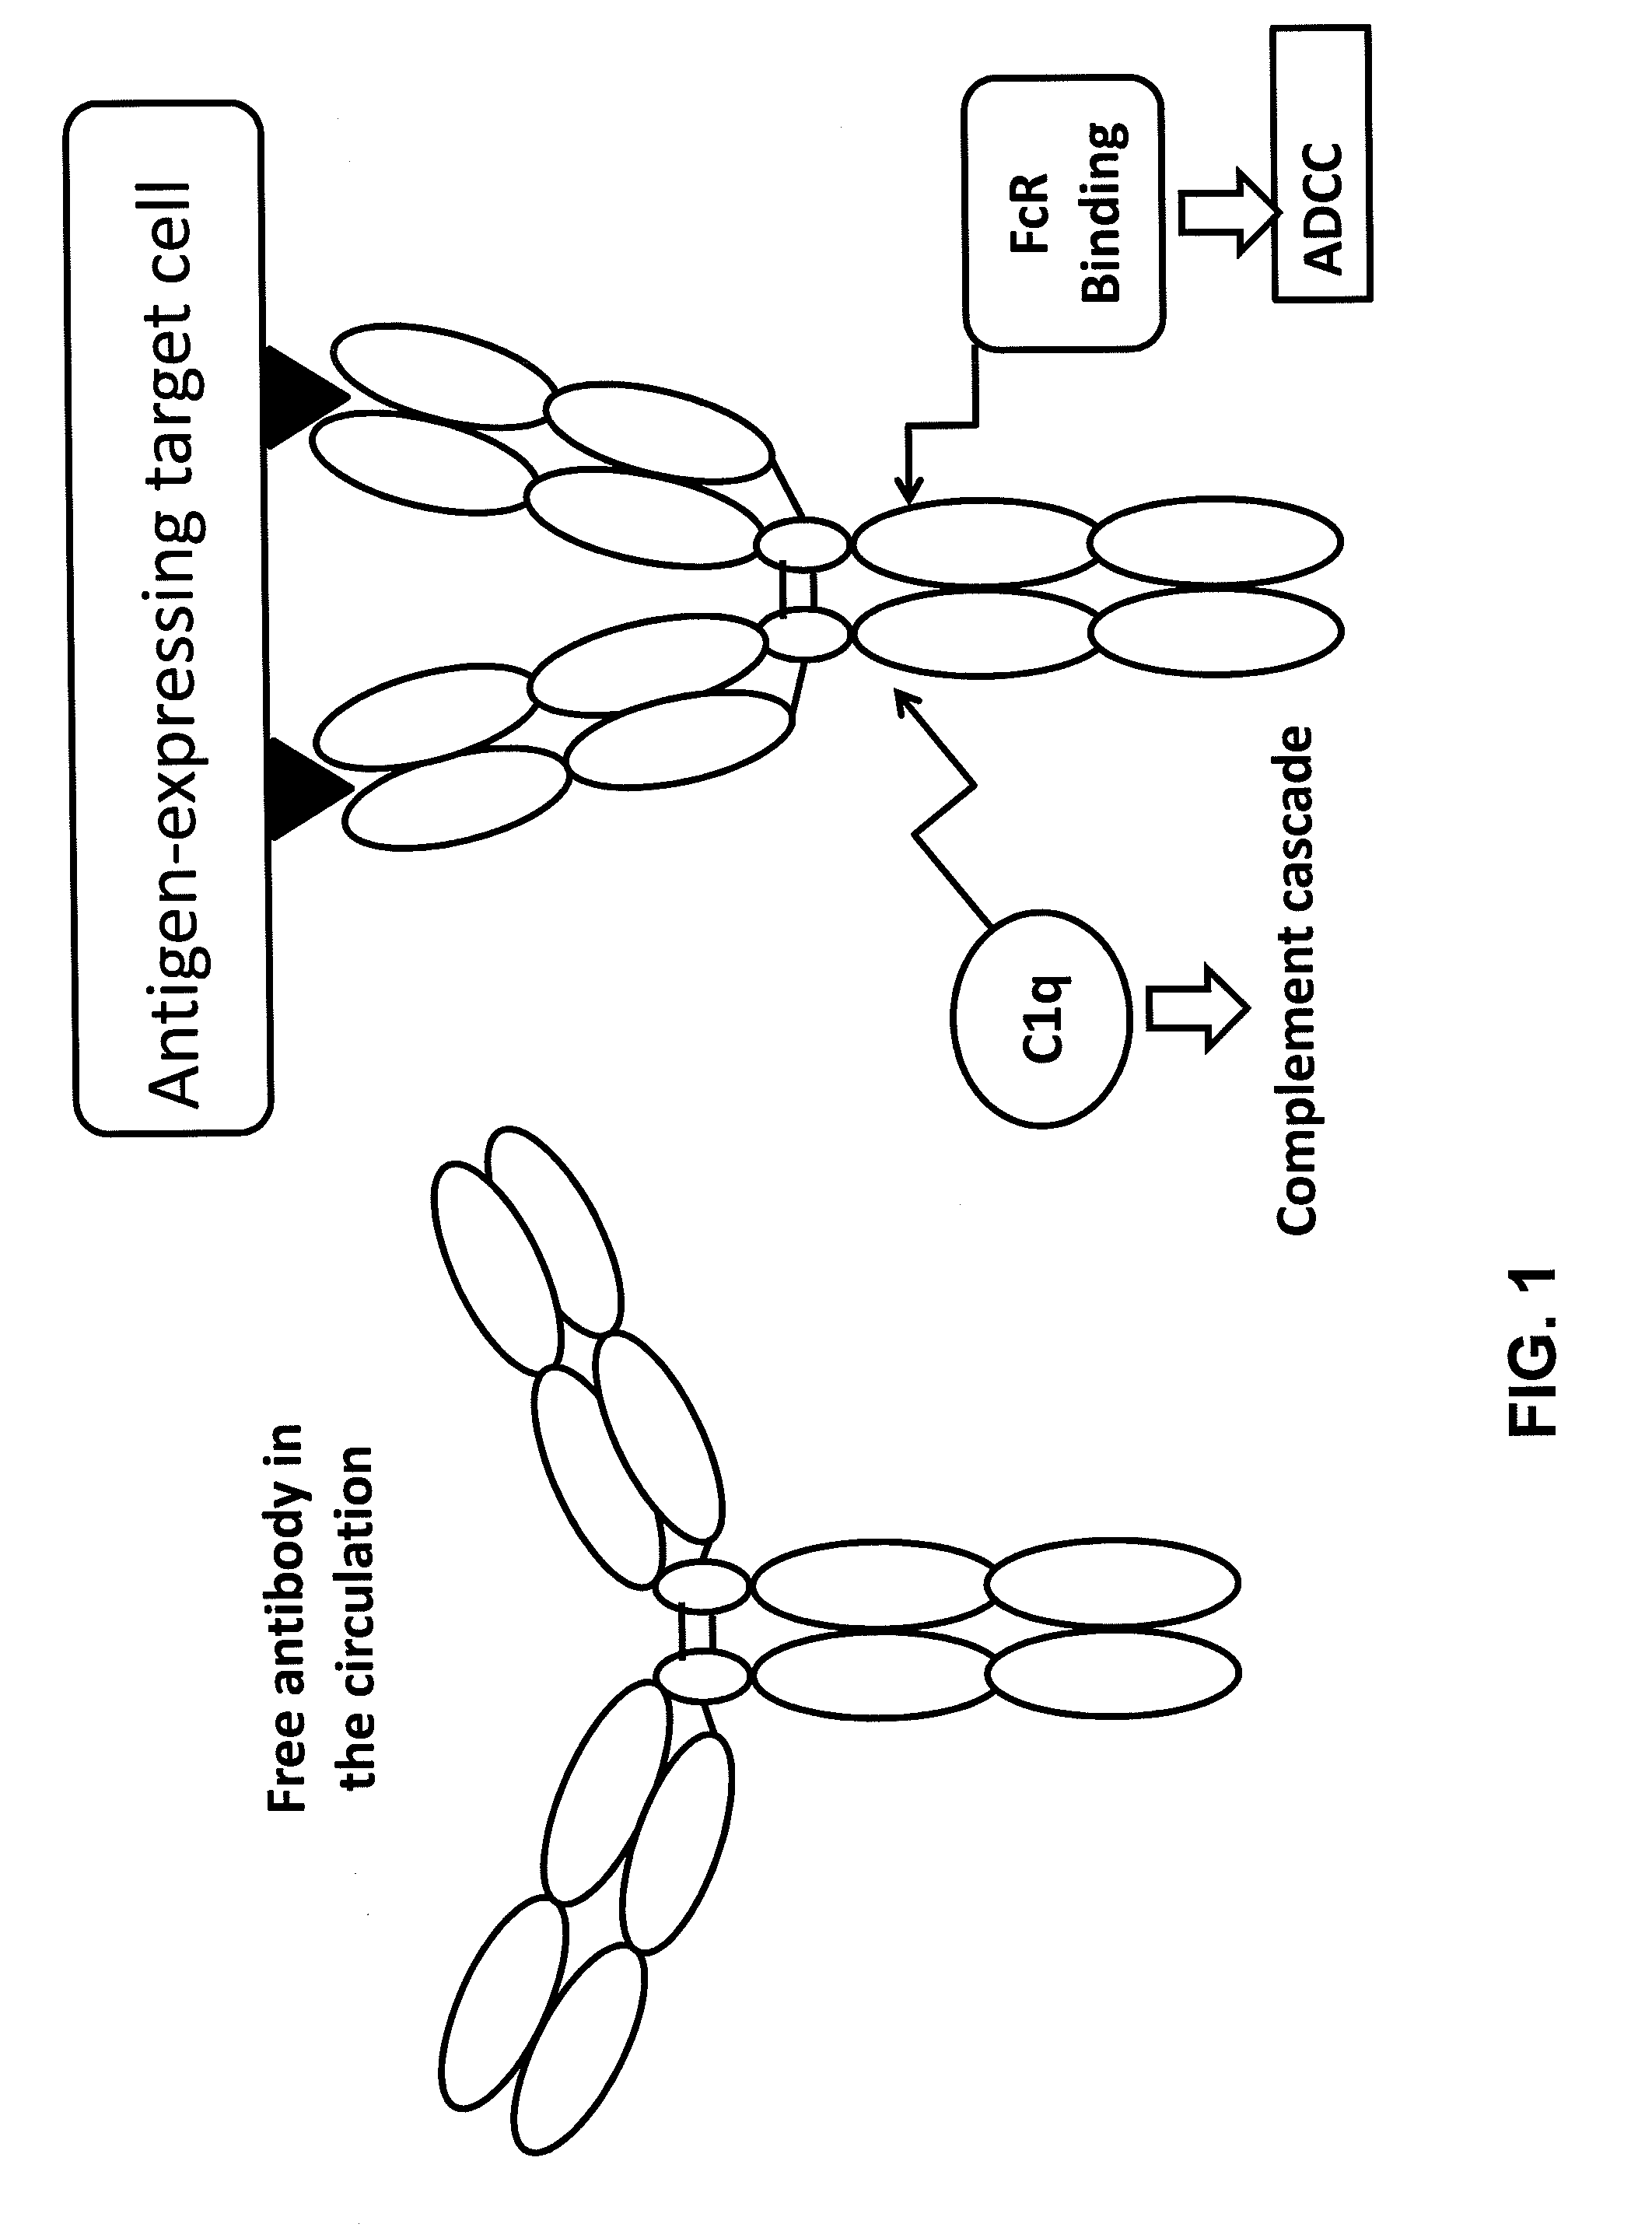 Light chain immunoglobulin fusion proteins and methods of use thereof